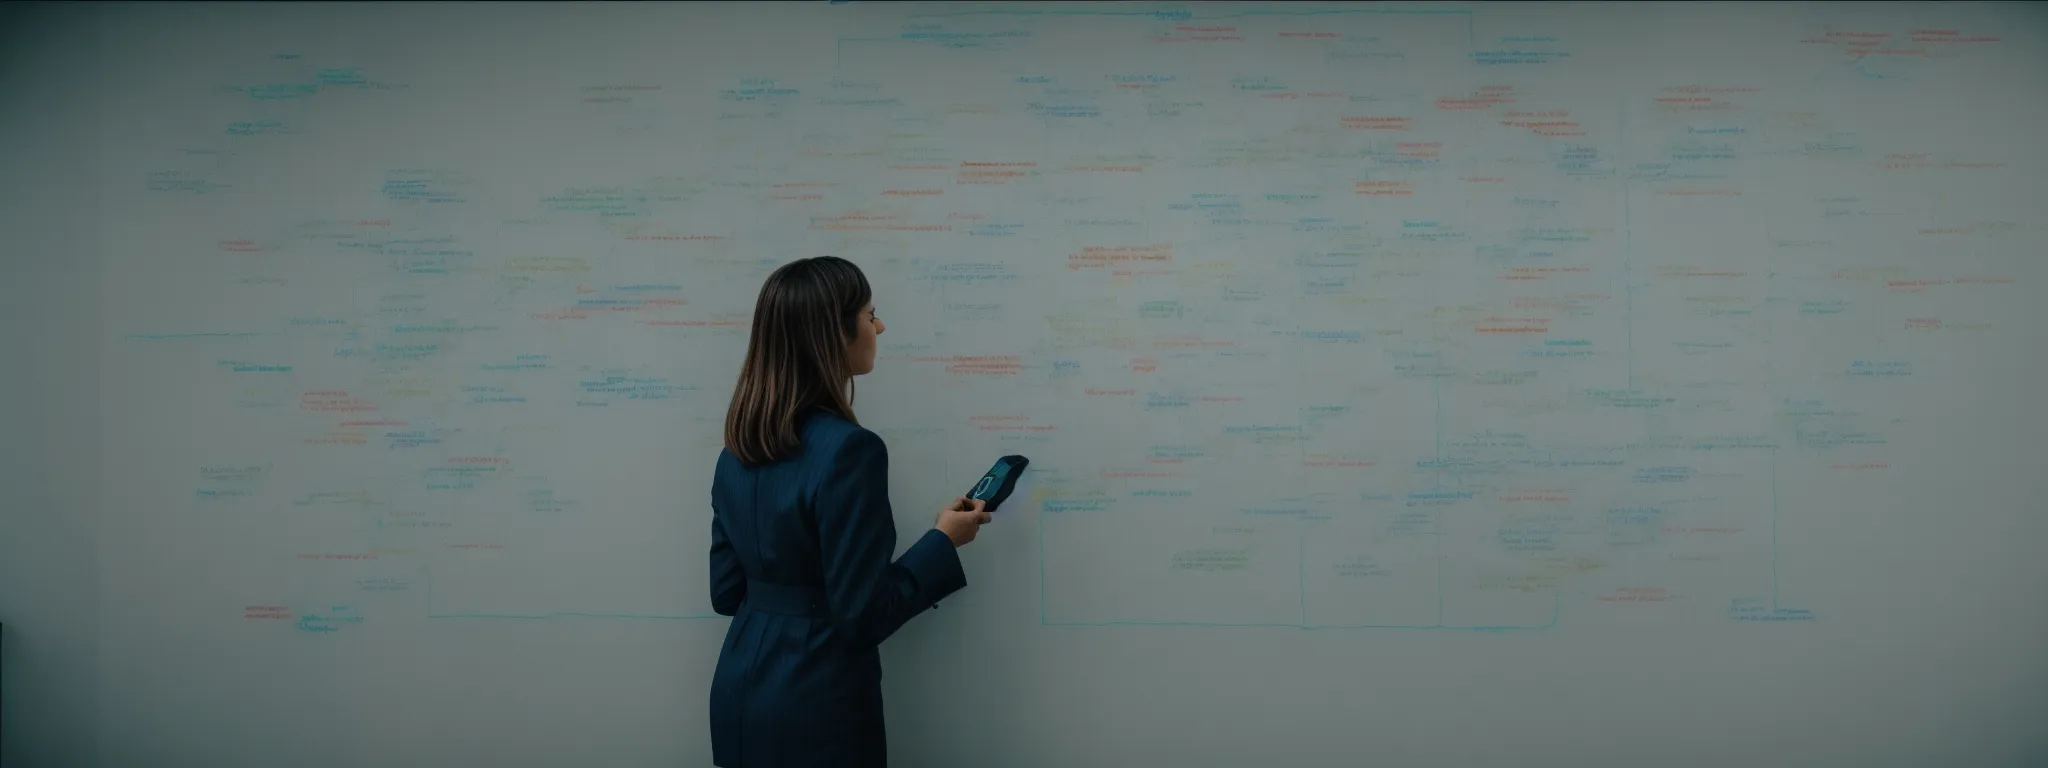 a marketer stands before a large, clear board, plotting out connections between various keyword clusters with colorful markers.